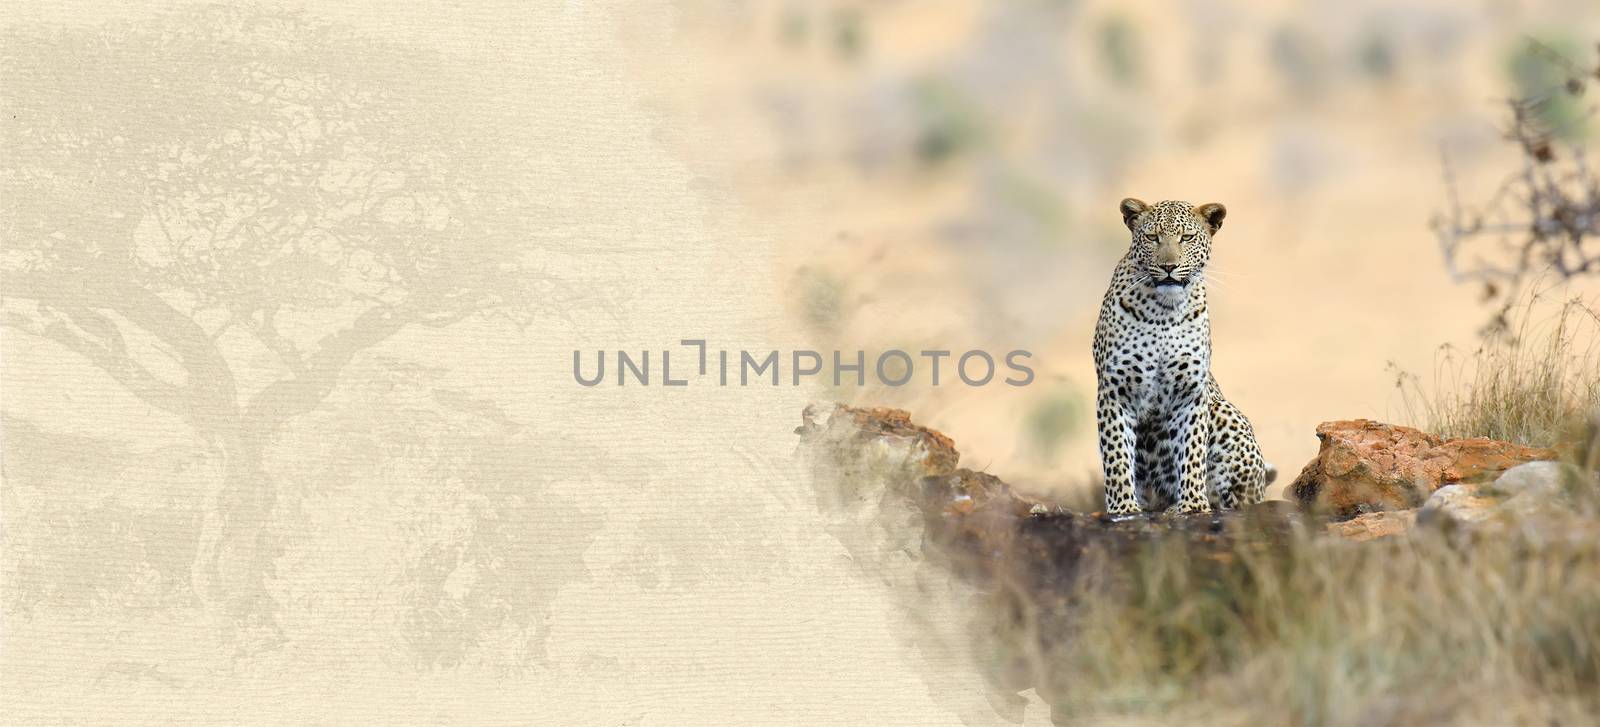 Leopard on textured paper. Animal on a background of old paper